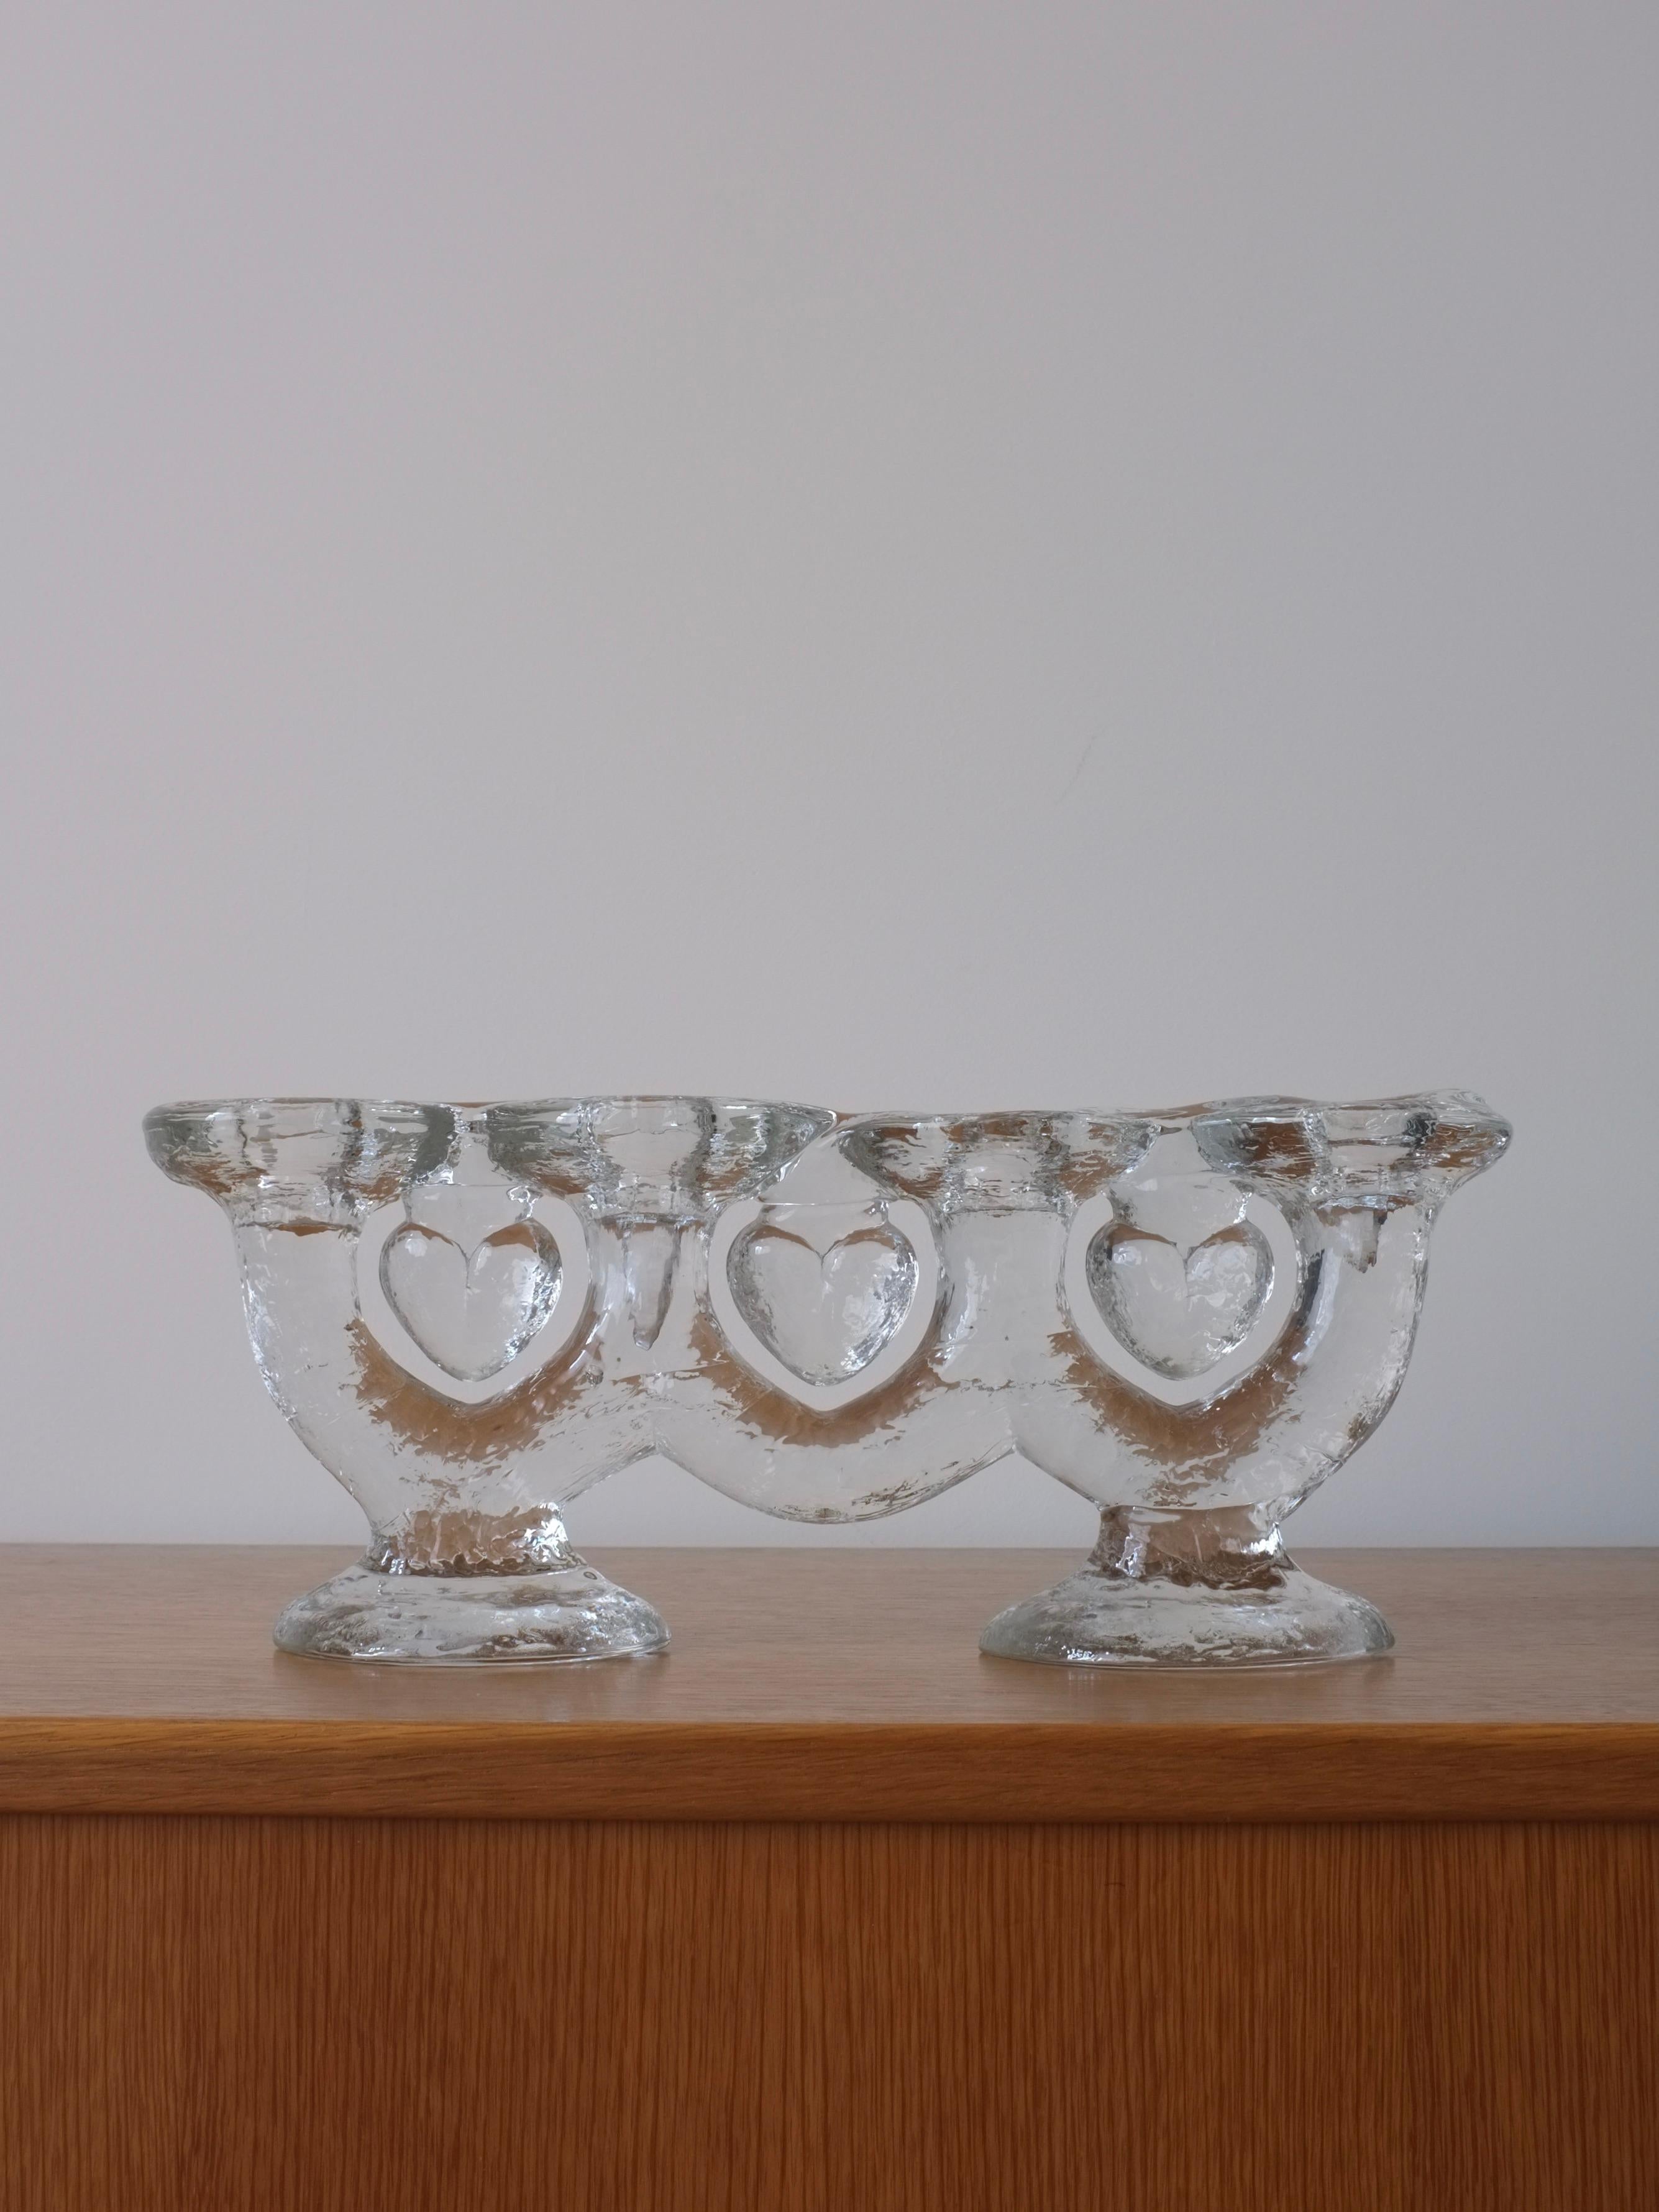 Large Glass 4-Arms Candle Holder by Staffan Gellerstedt from Pukeberg Glasbruk For Sale 1